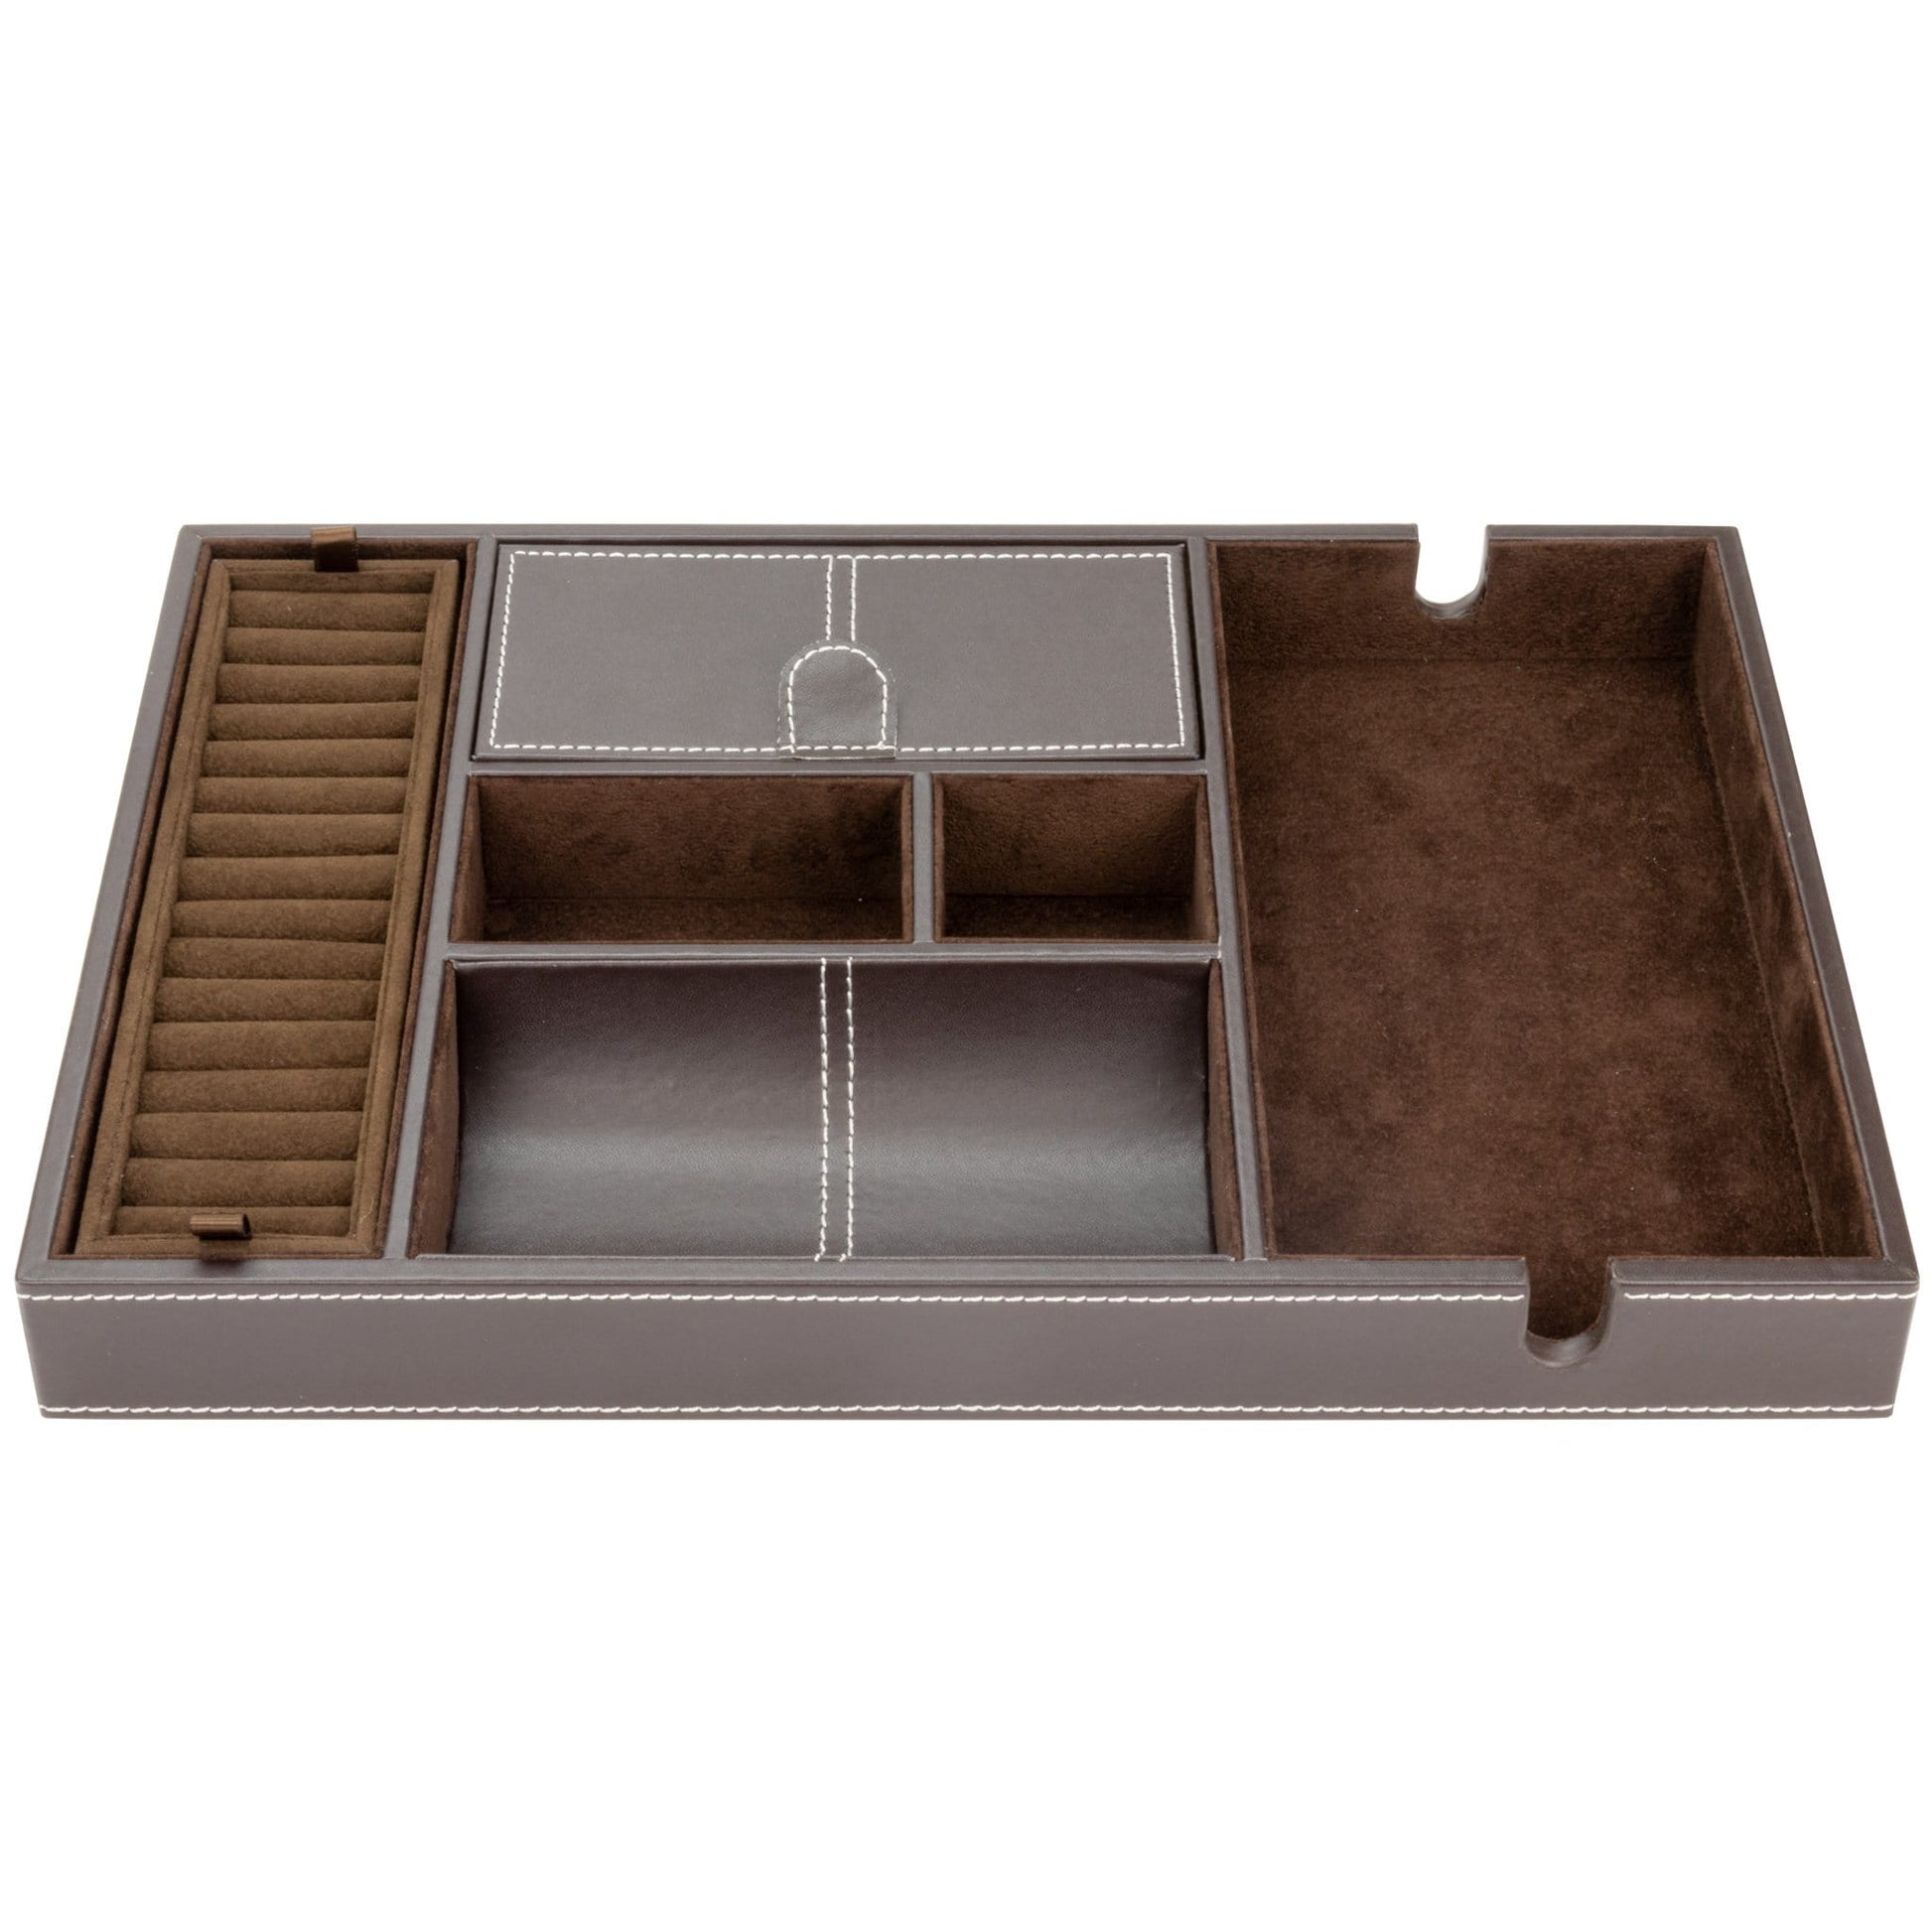 HOUNDSBAY Valet Organizer Ring, Cufflink, and Jewelry Tray for Admiral, Commander, and Victory Valets